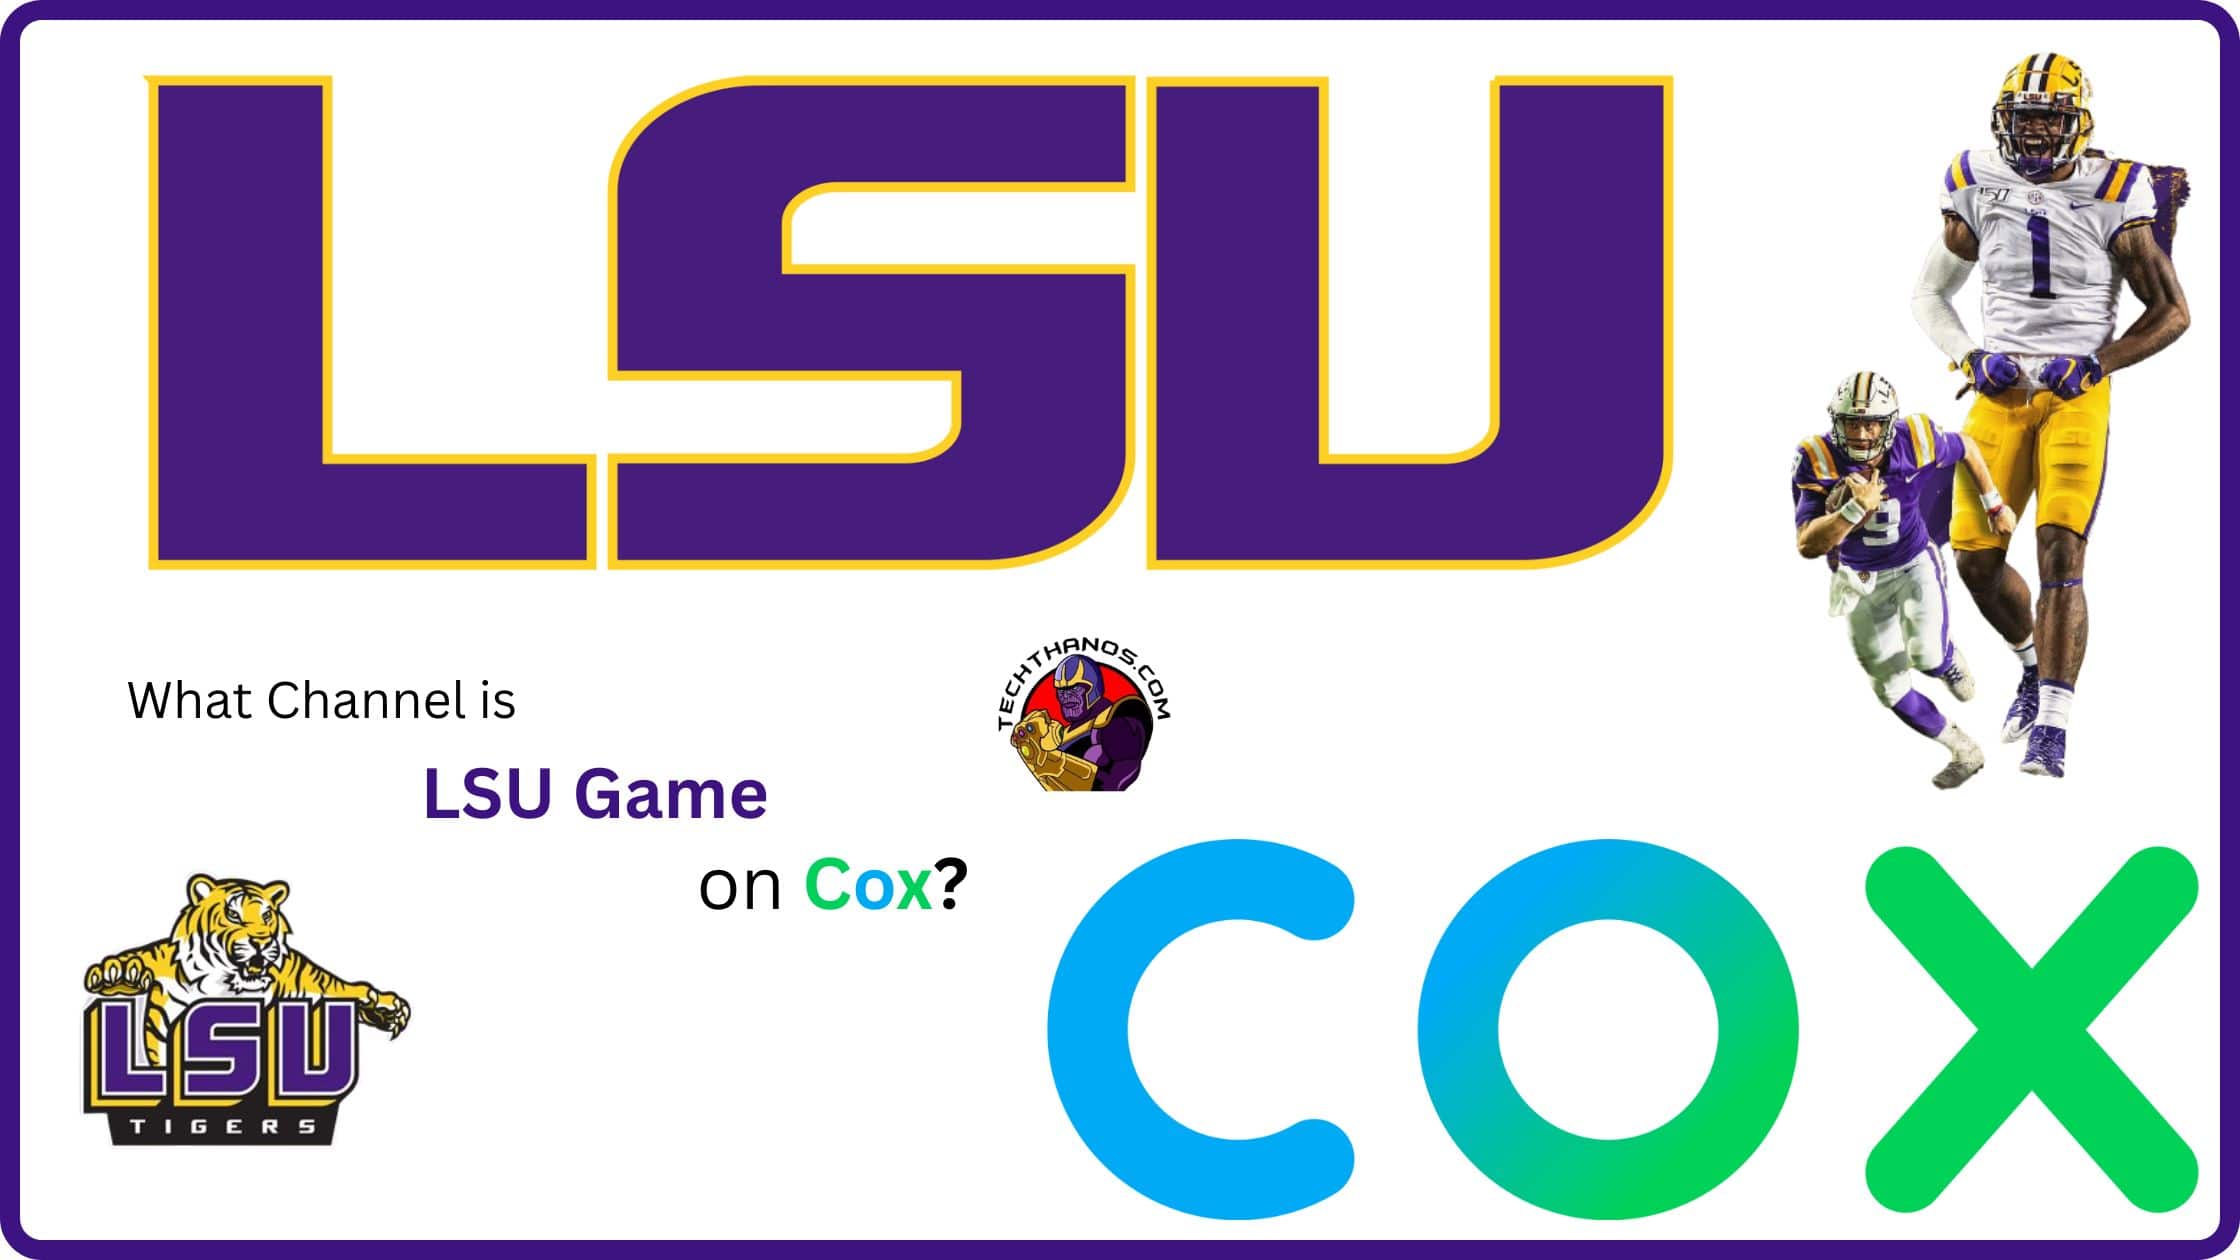 What Channel is LSU Game on Cox?